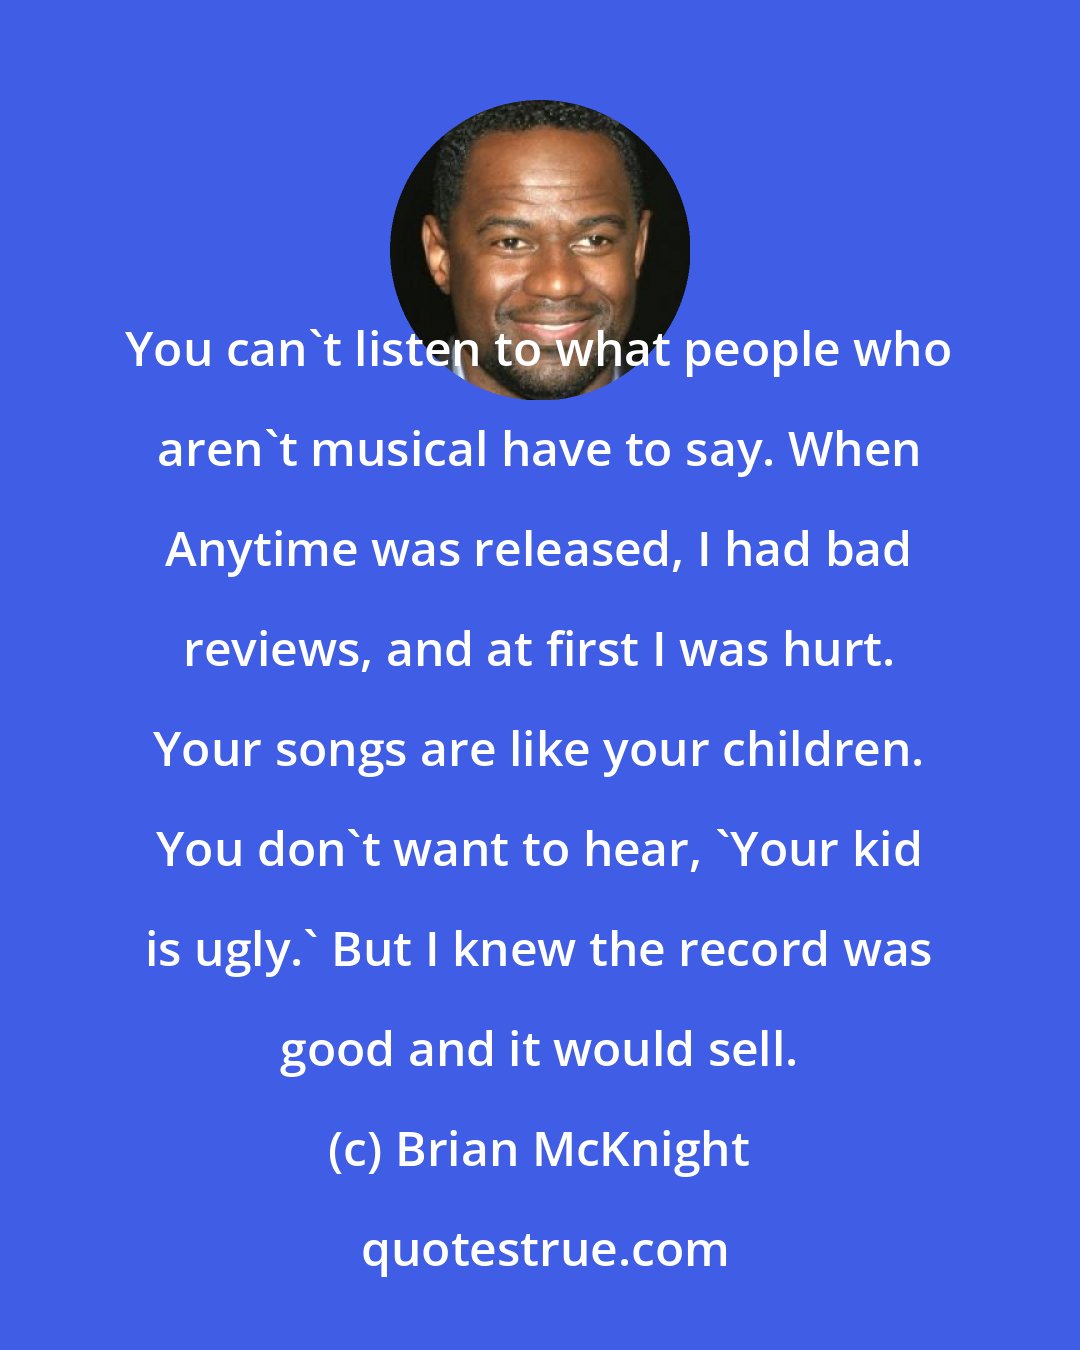 Brian McKnight: You can't listen to what people who aren't musical have to say. When Anytime was released, I had bad reviews, and at first I was hurt. Your songs are like your children. You don't want to hear, 'Your kid is ugly.' But I knew the record was good and it would sell.